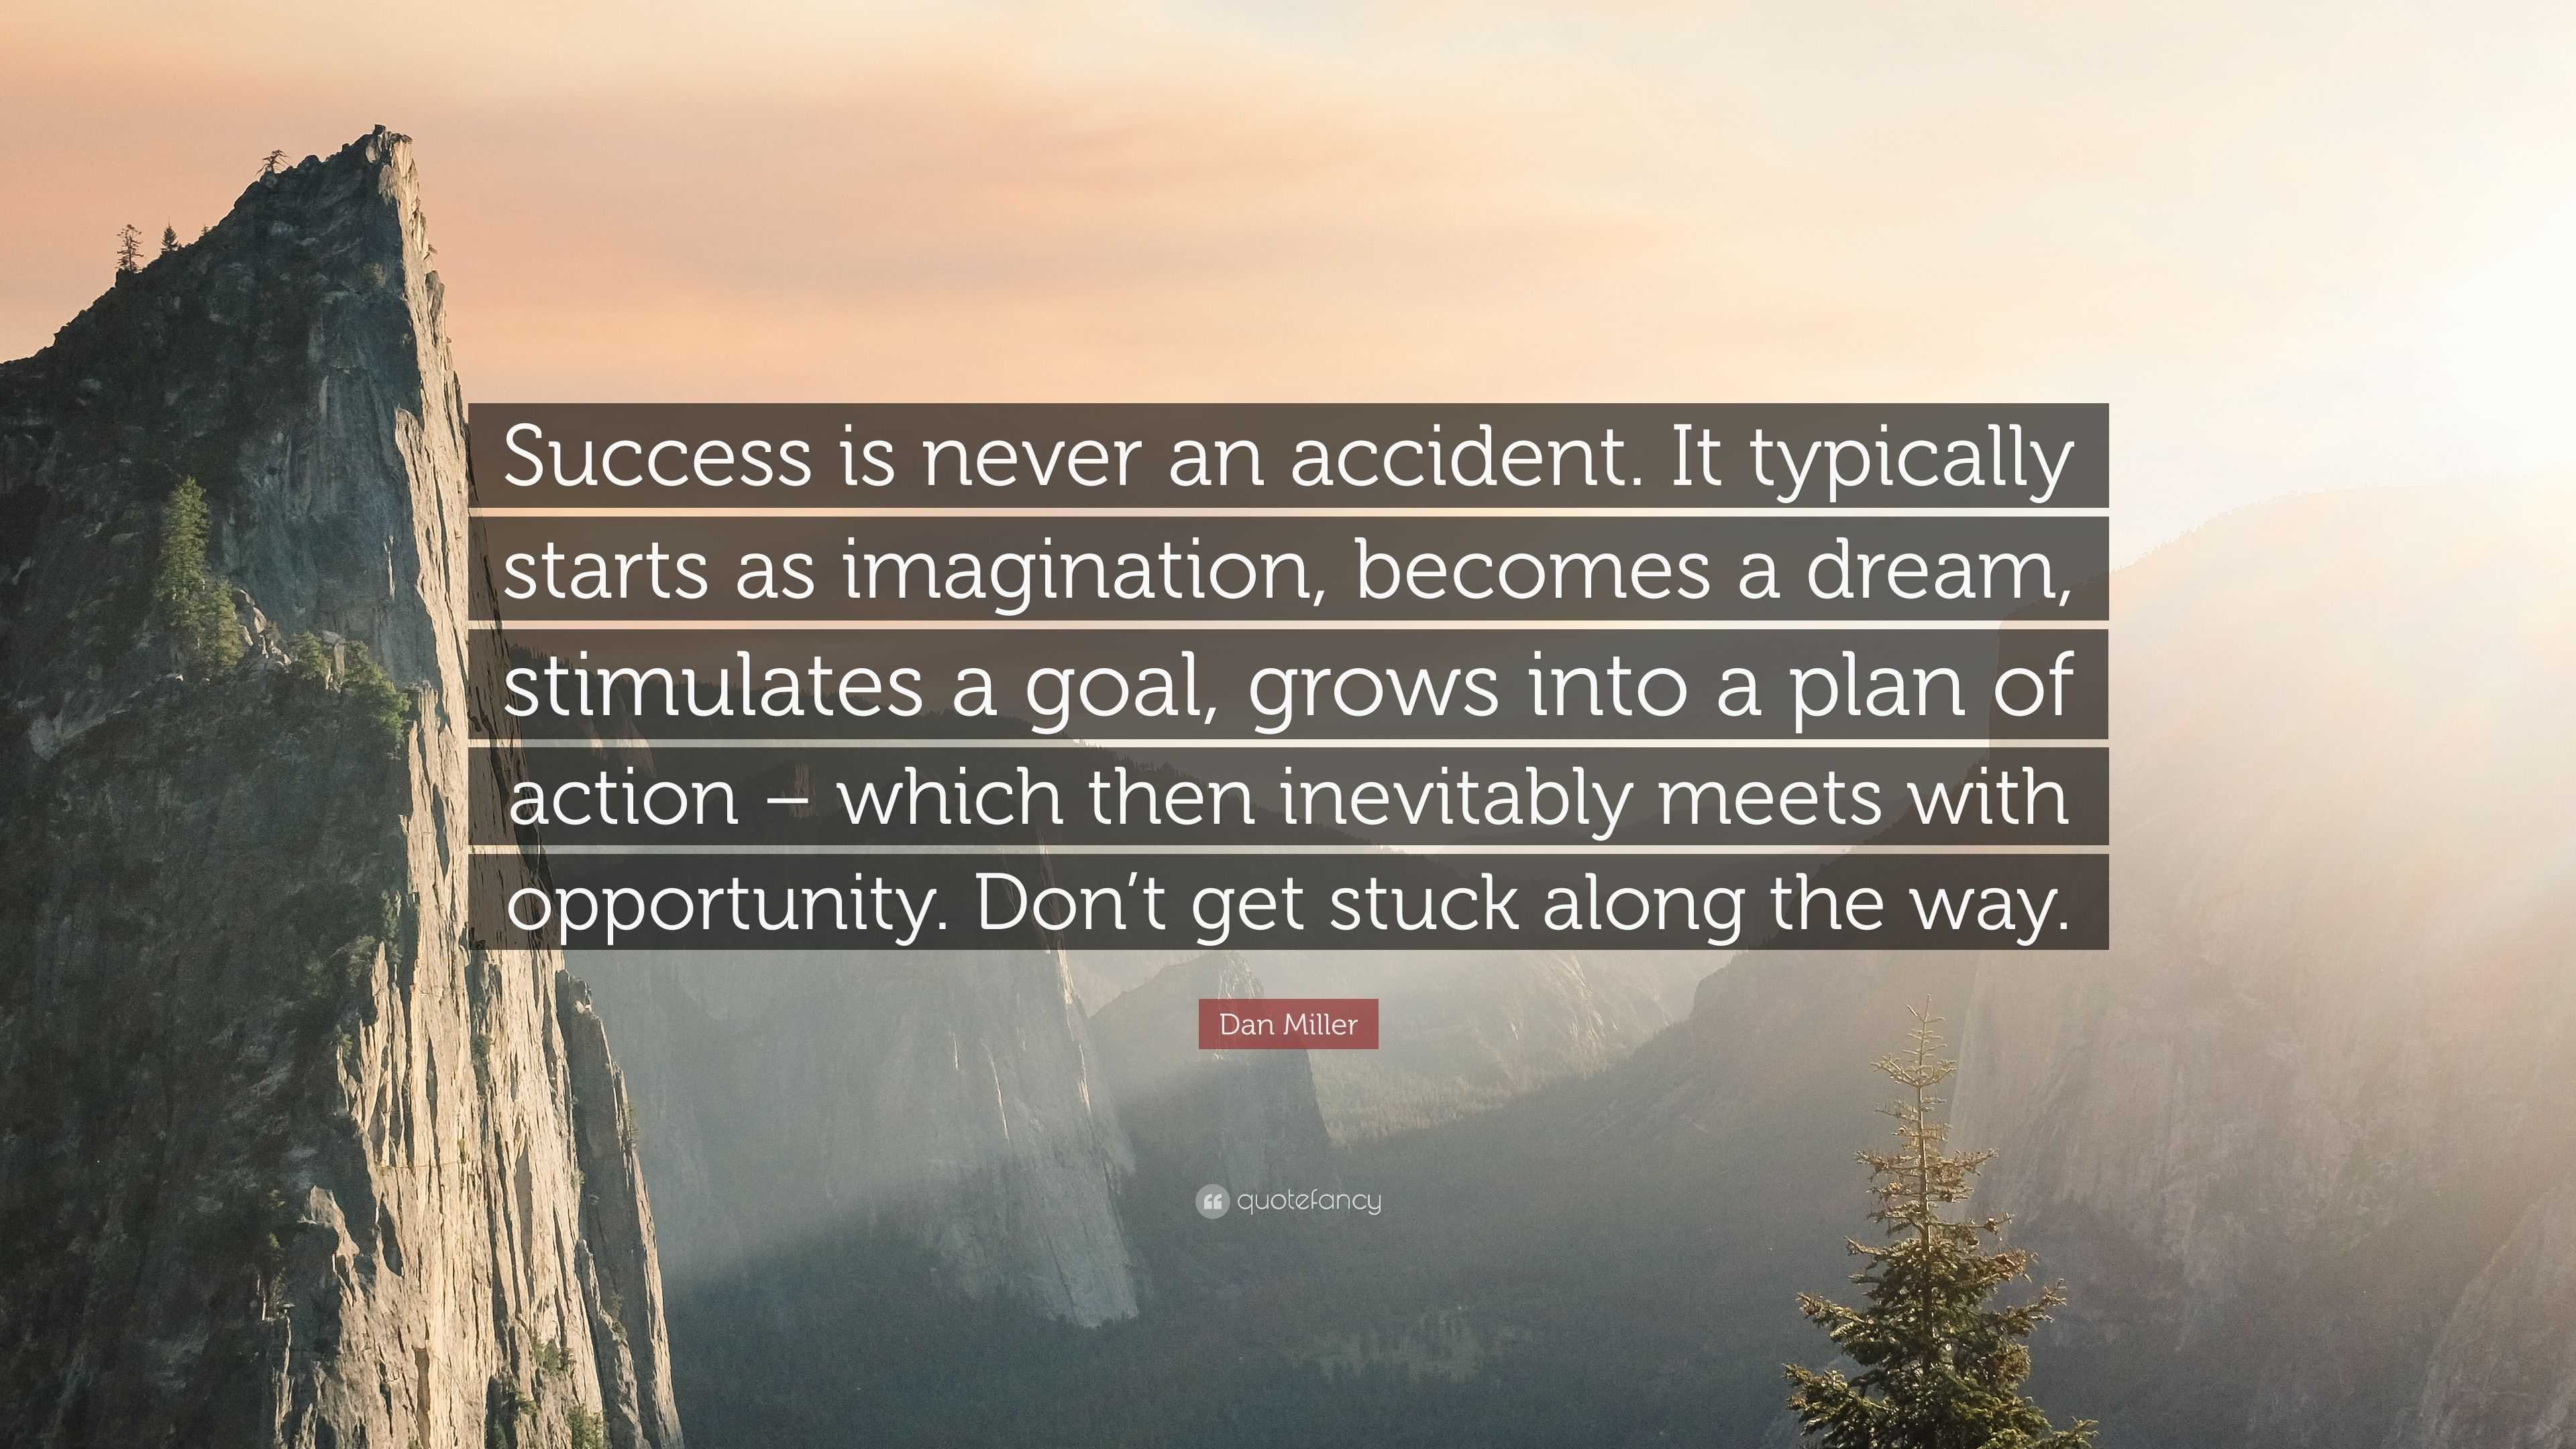 Dan Miller Quote: “Success Is Never An Accident. It Typically Starts As Imagination, Becomes A Dream, Stimulates A Goal, Grows Into A Plan ...”